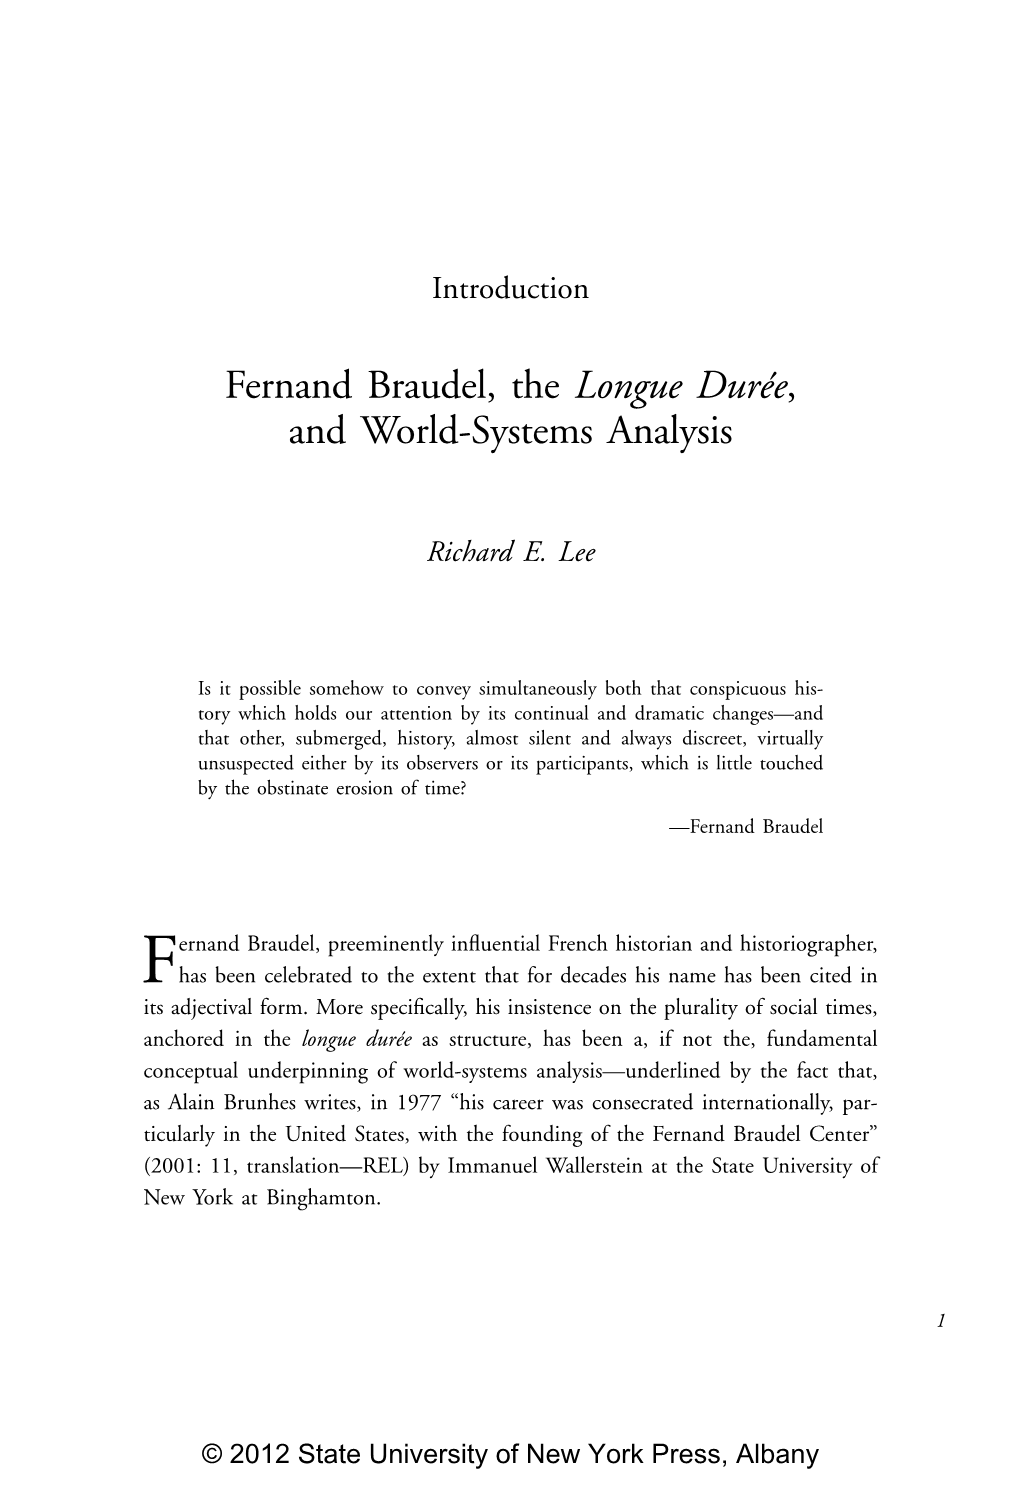 Fernand Braudel, the Longue Durée, and World-Systems Analysis